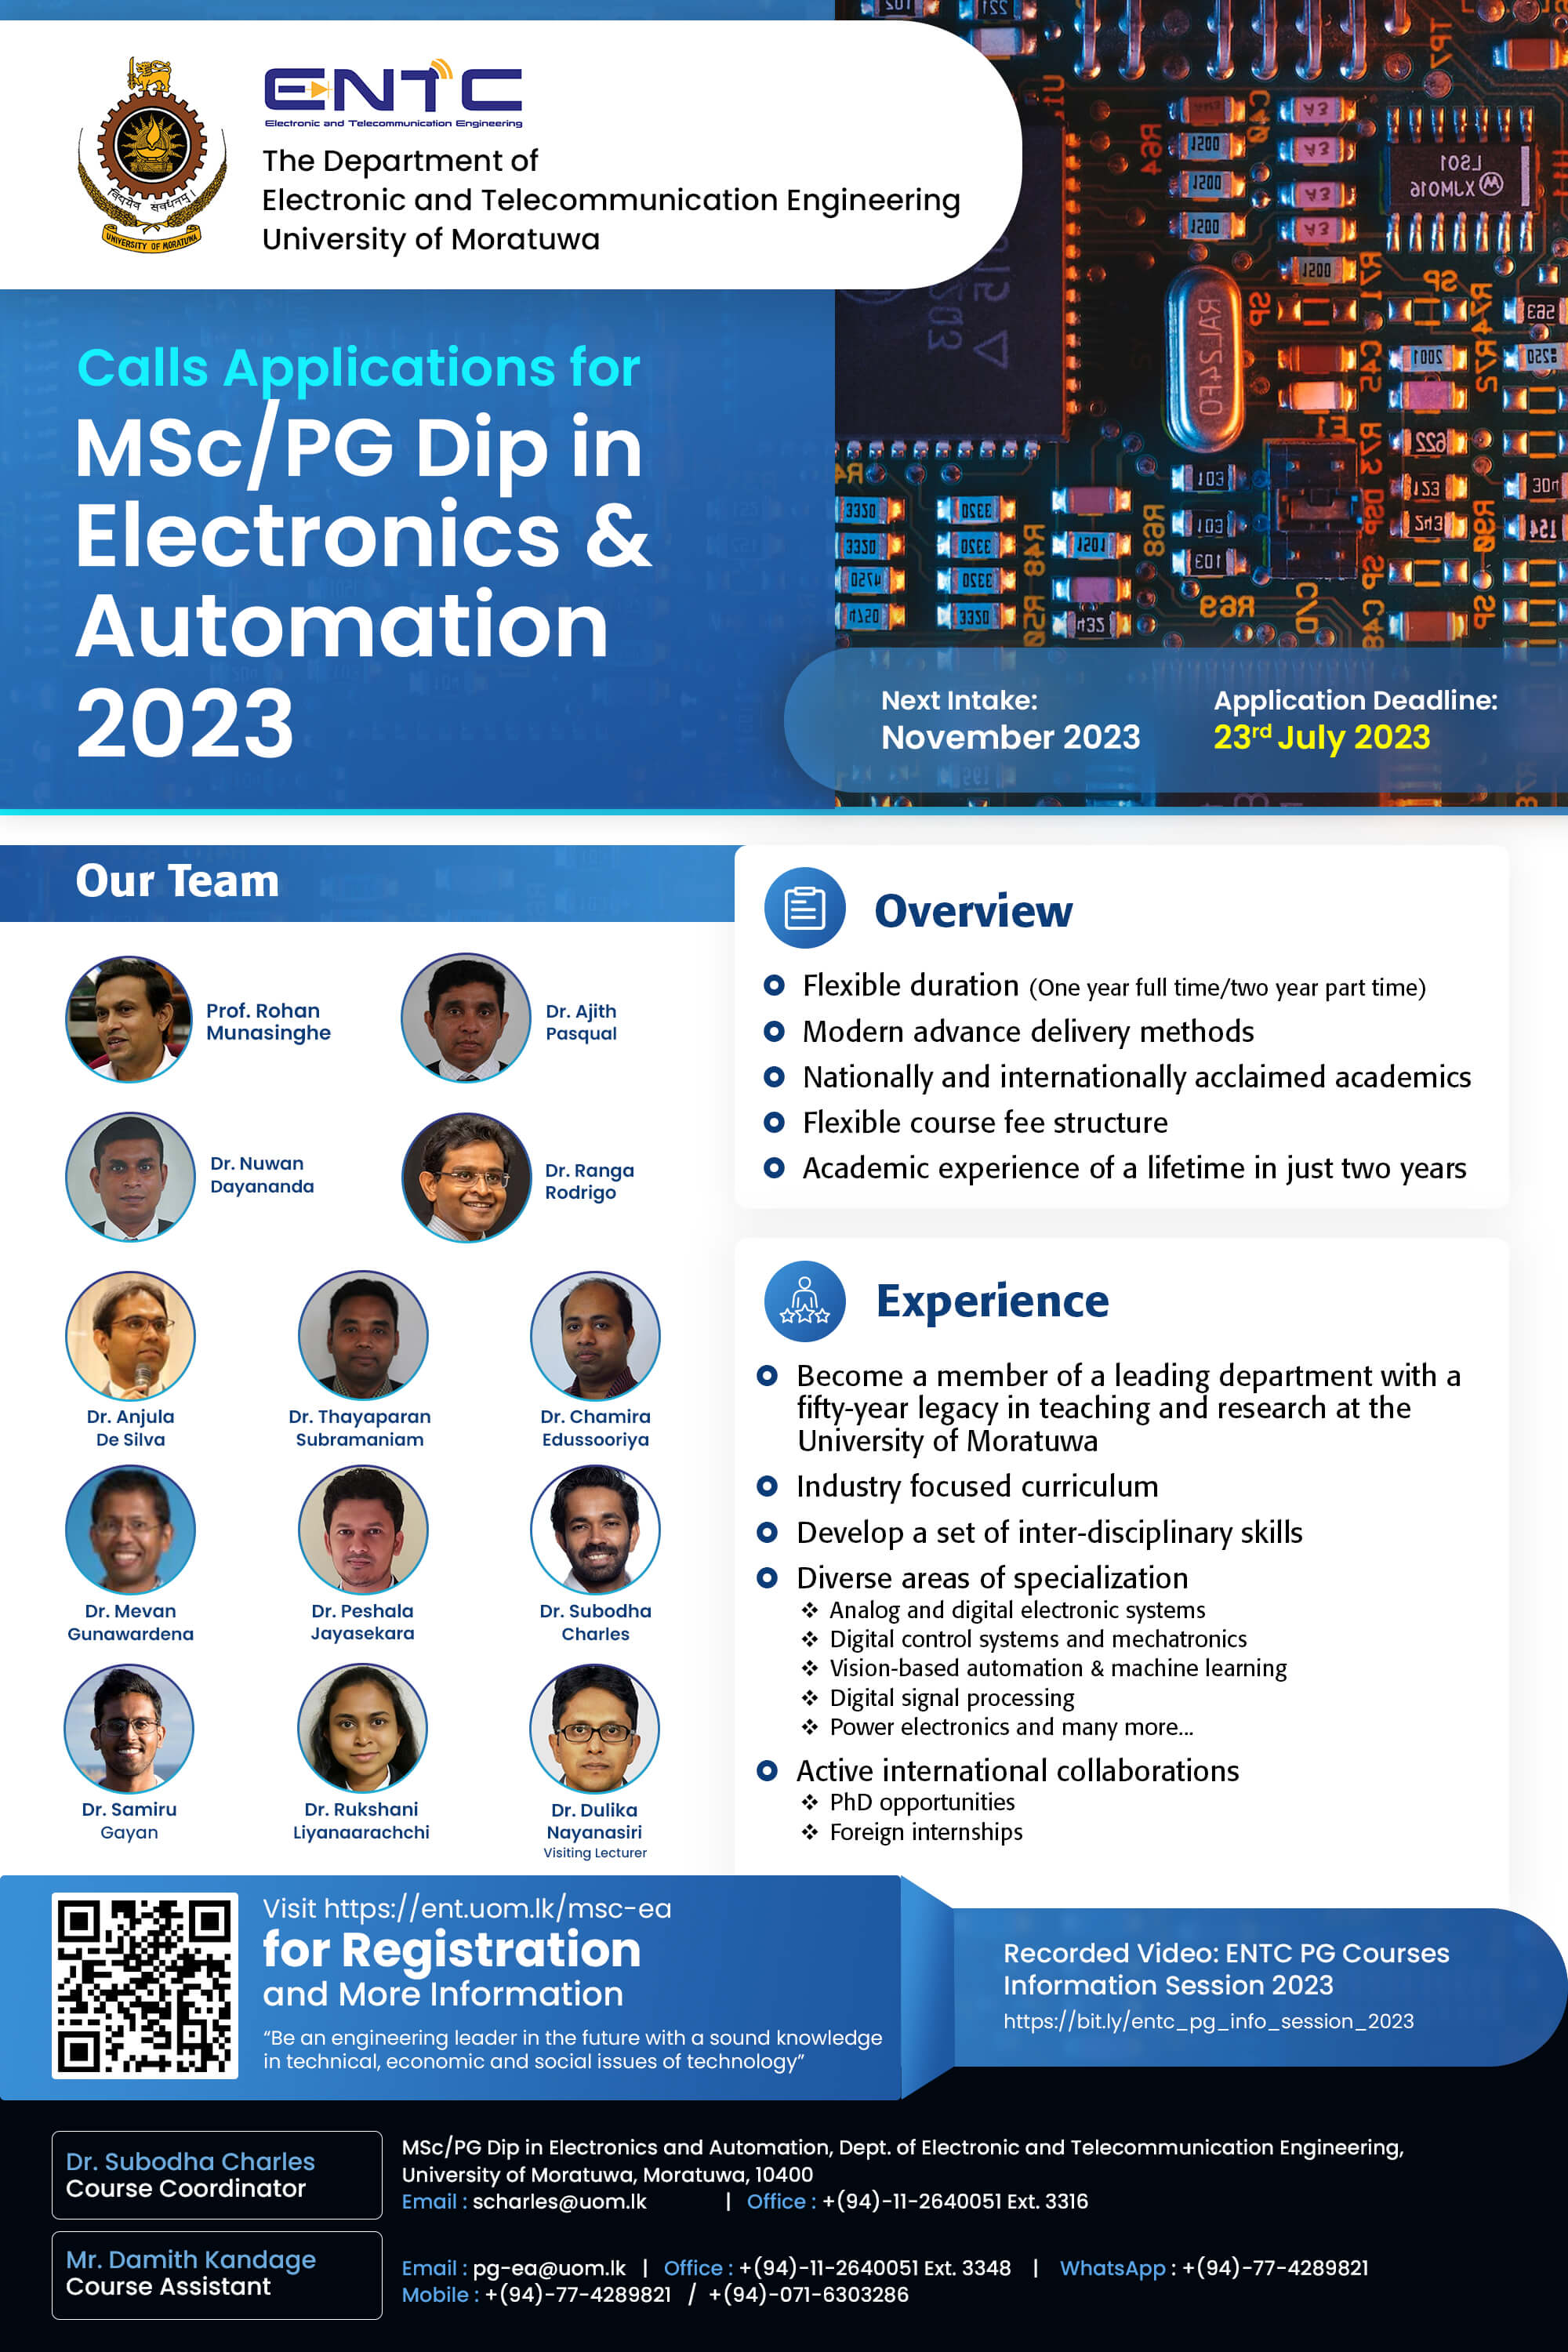 MSc/PG Diploma in Electronics and Automation